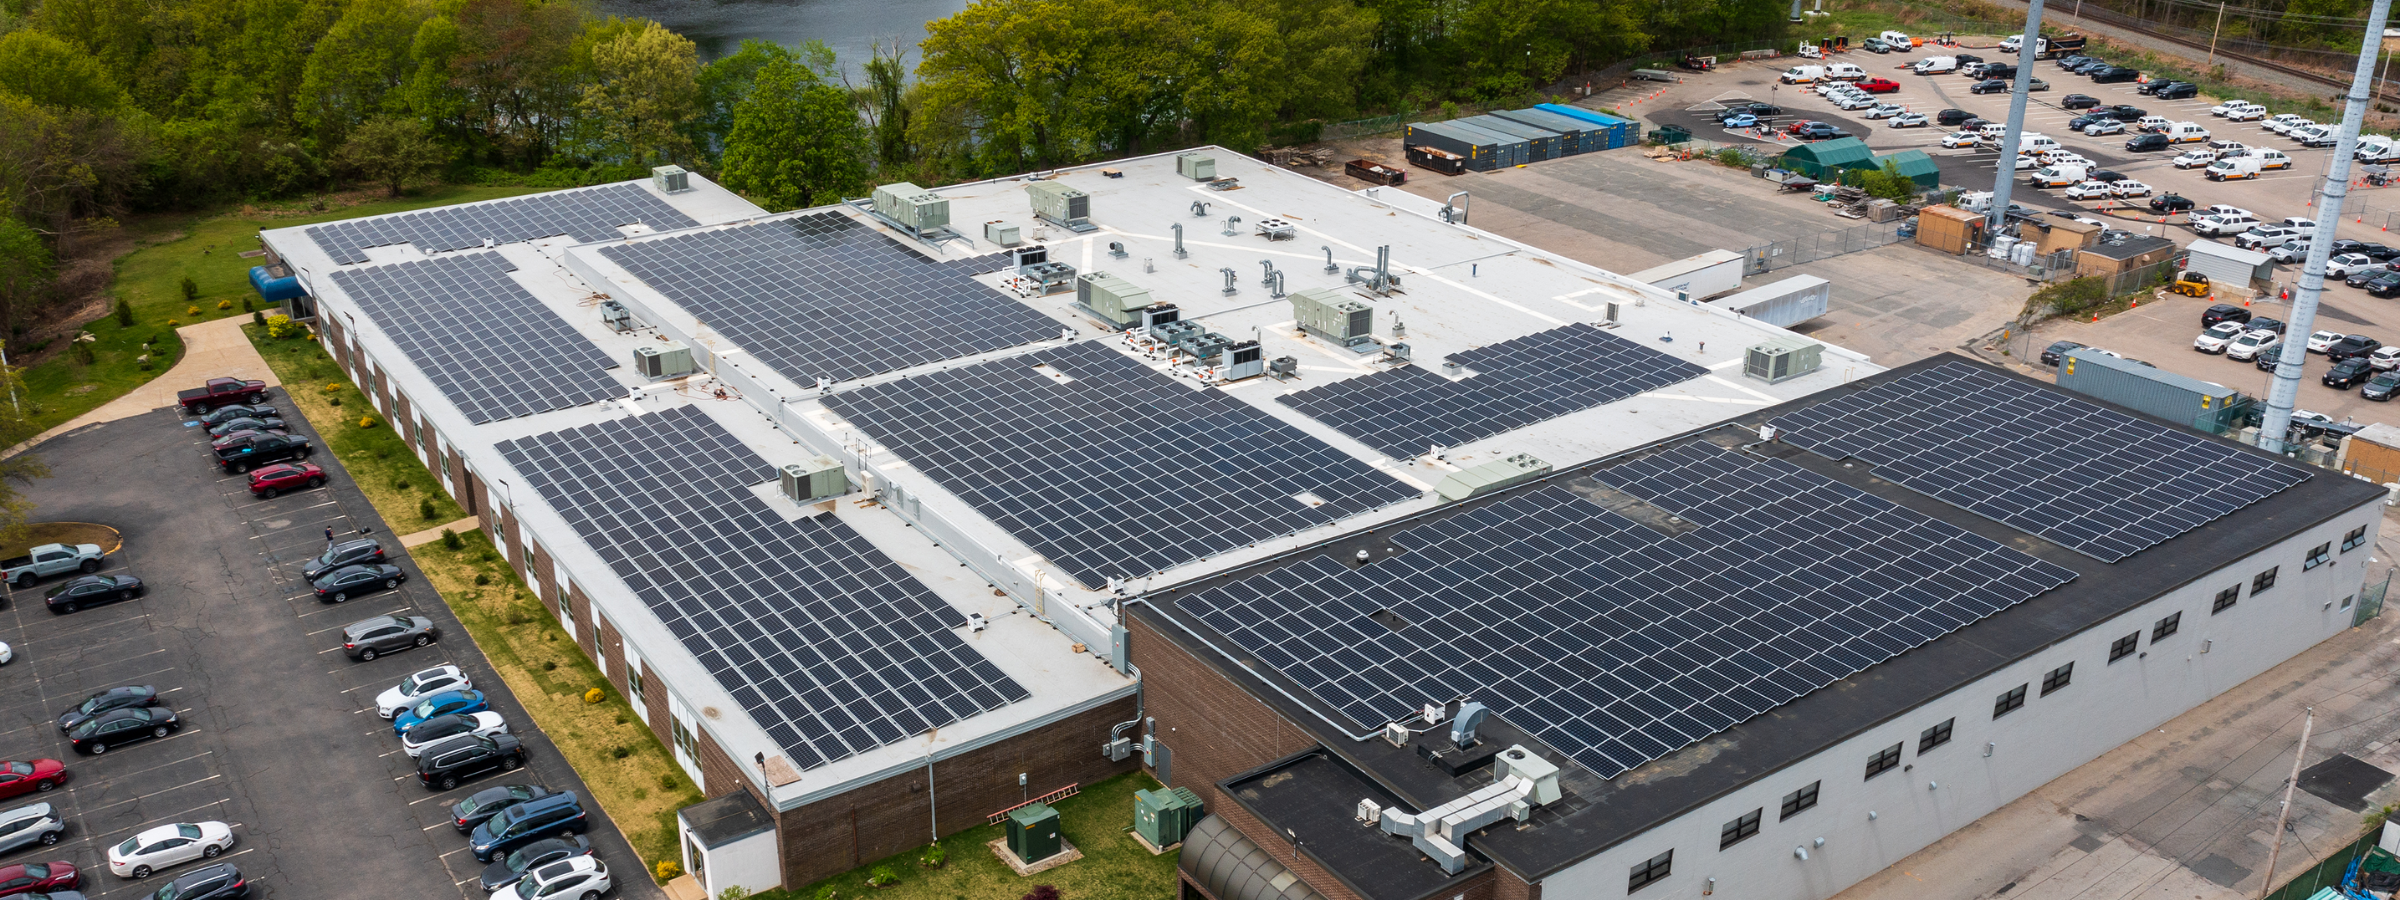 Boston Solar Announces Completion of Major Rooftop Solar Installation for Global Manufacturer - ABCorp